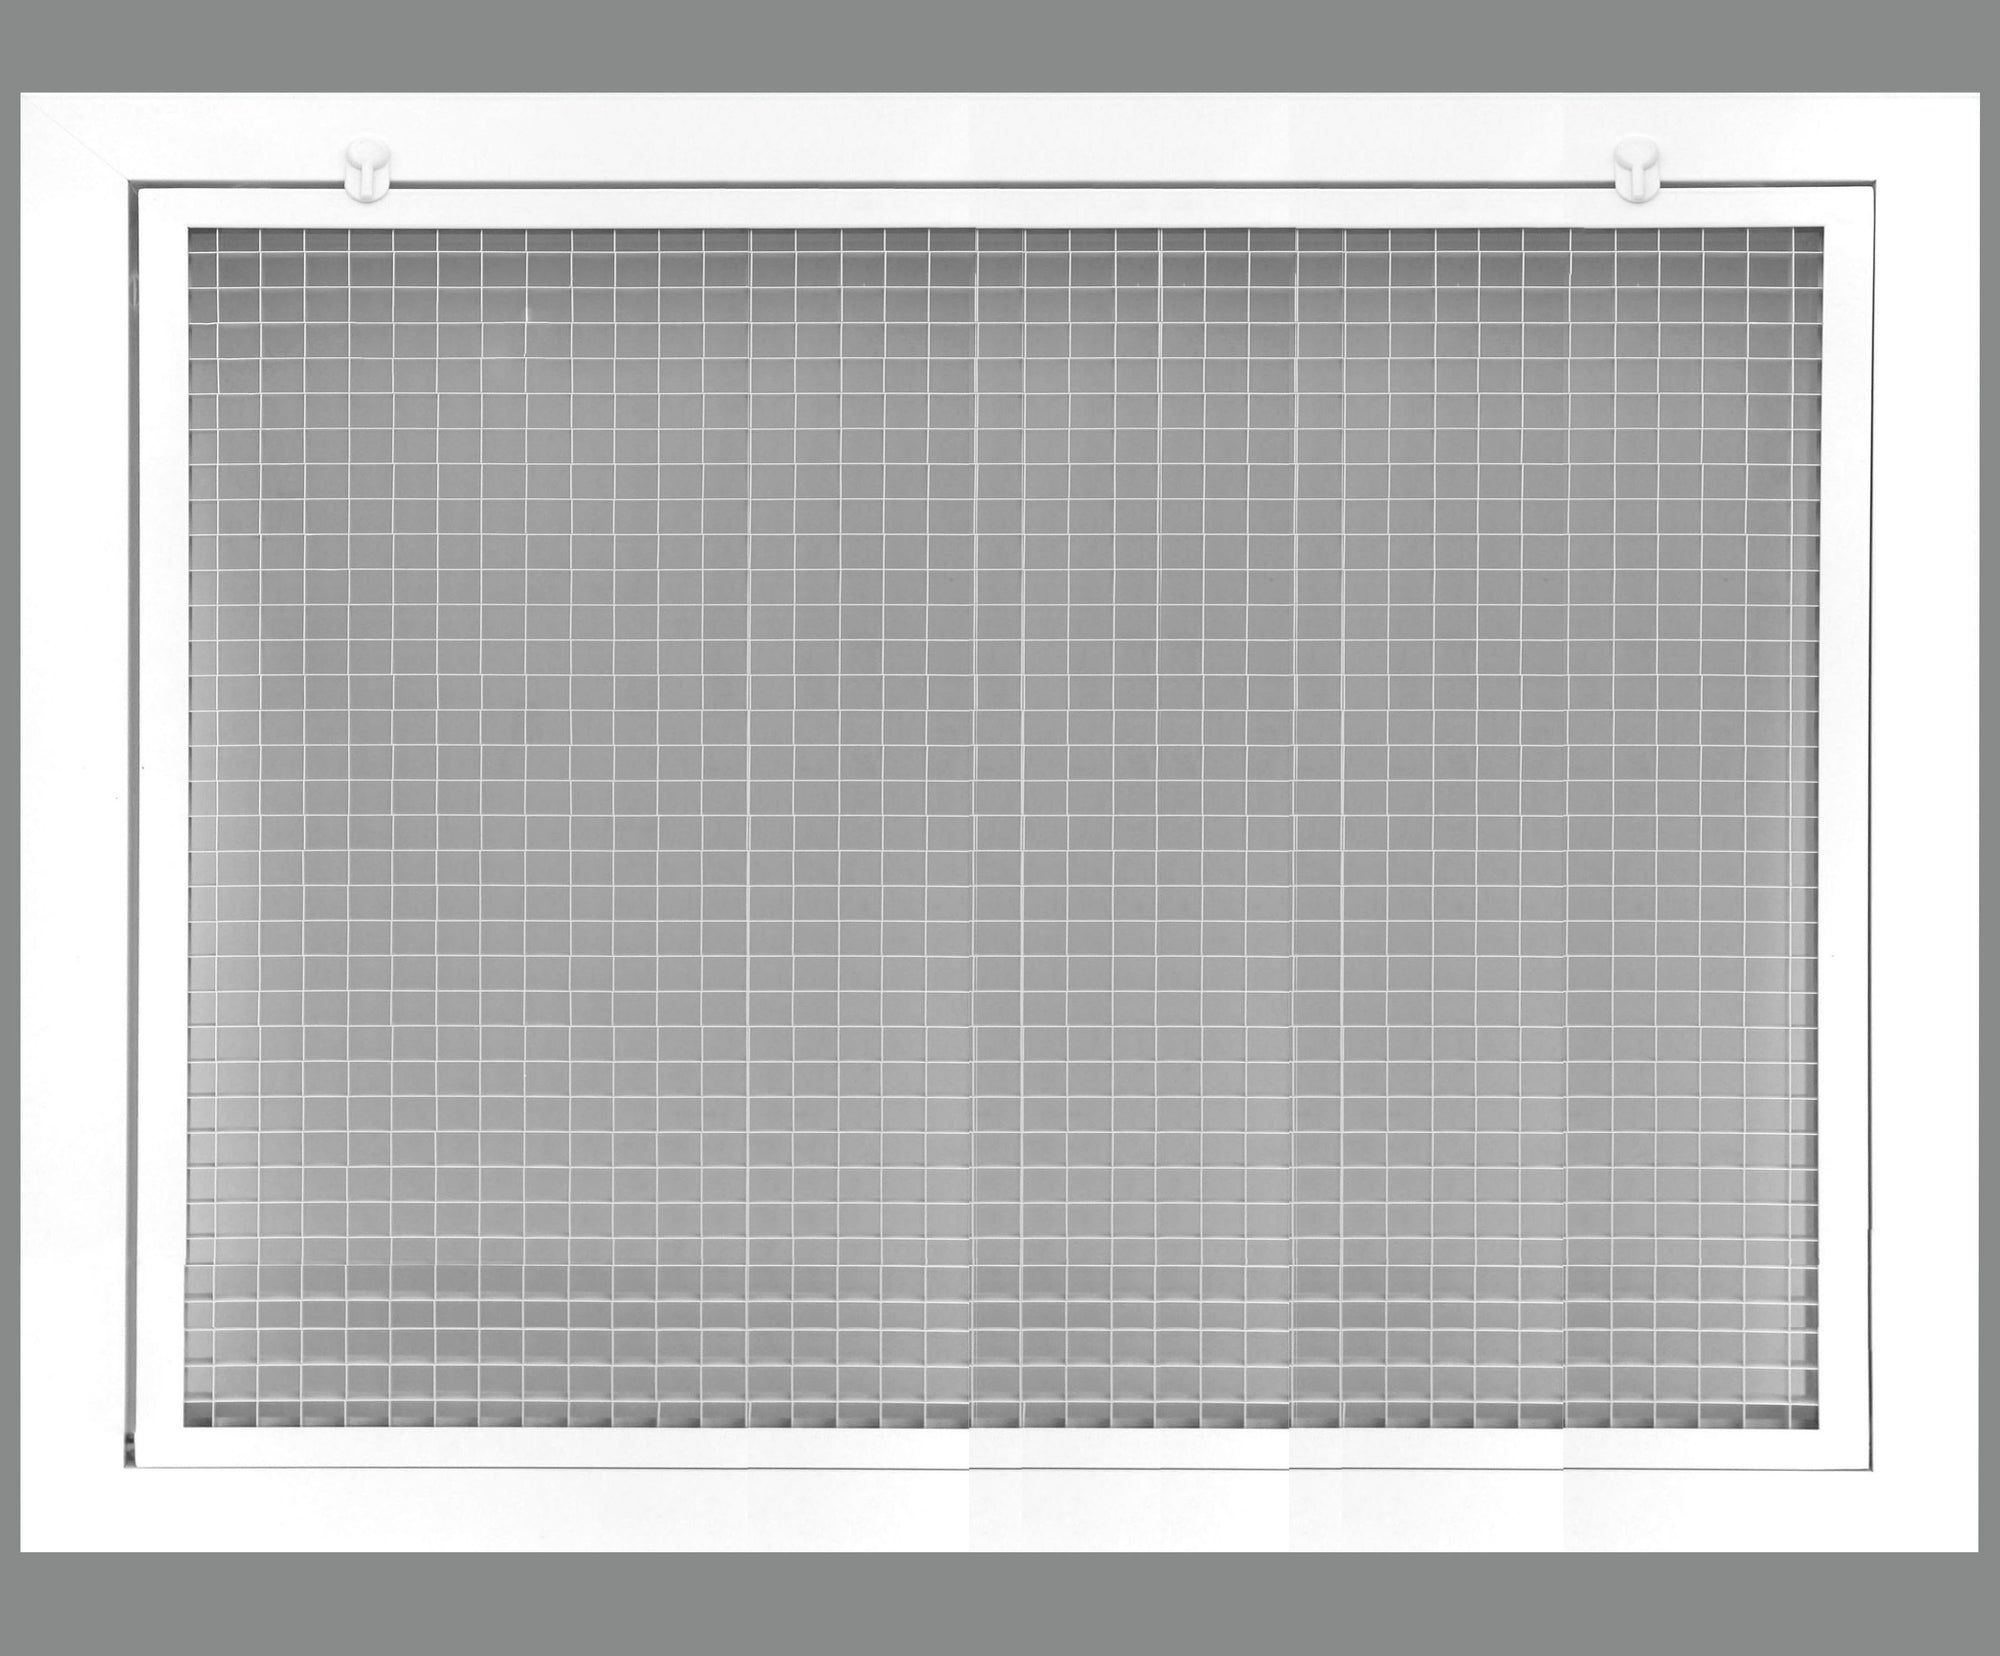 32" x 28" Cube Core Eggcrate Return Air Filter Grille for 1" Filter